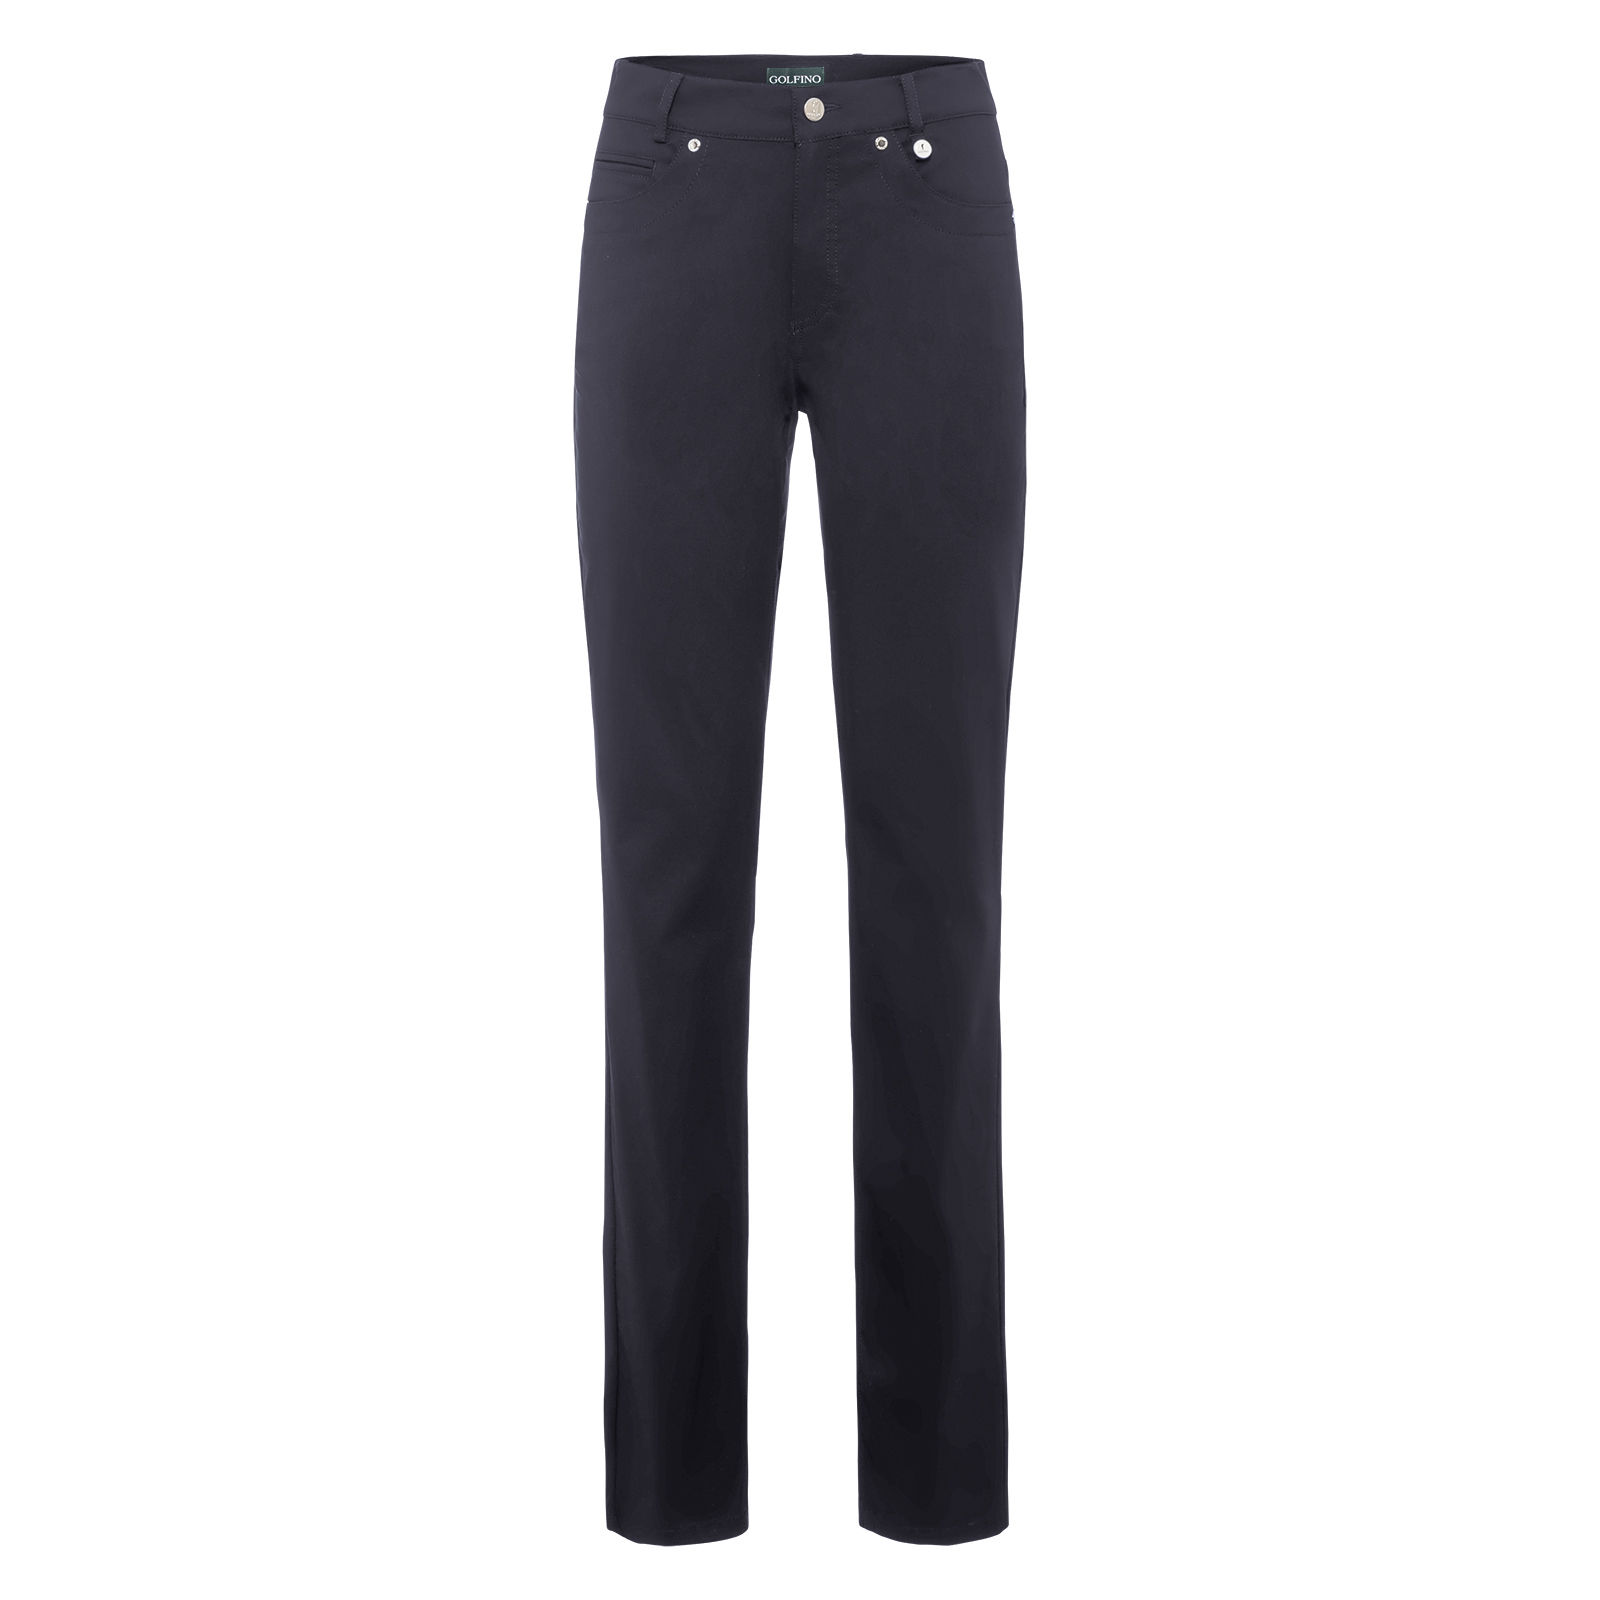 Flexible ladies' trousers made from a particularly lightweight textile material 